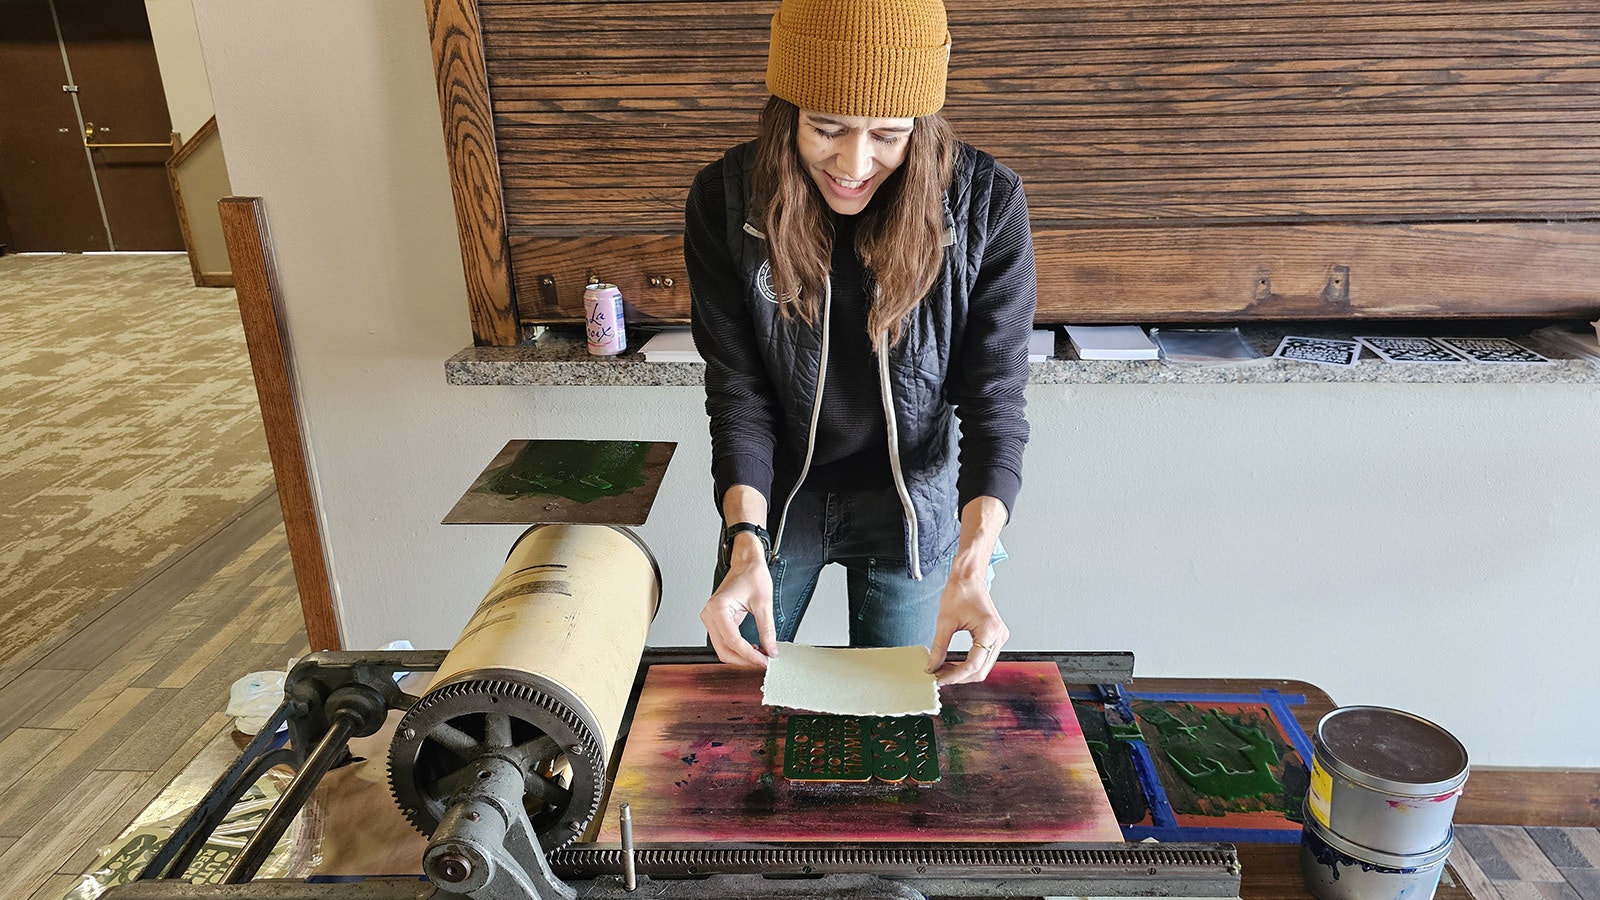 Kayla Clark carefully places a sheet of porous handmade paper on top of the laser-cut stencil she's inked.